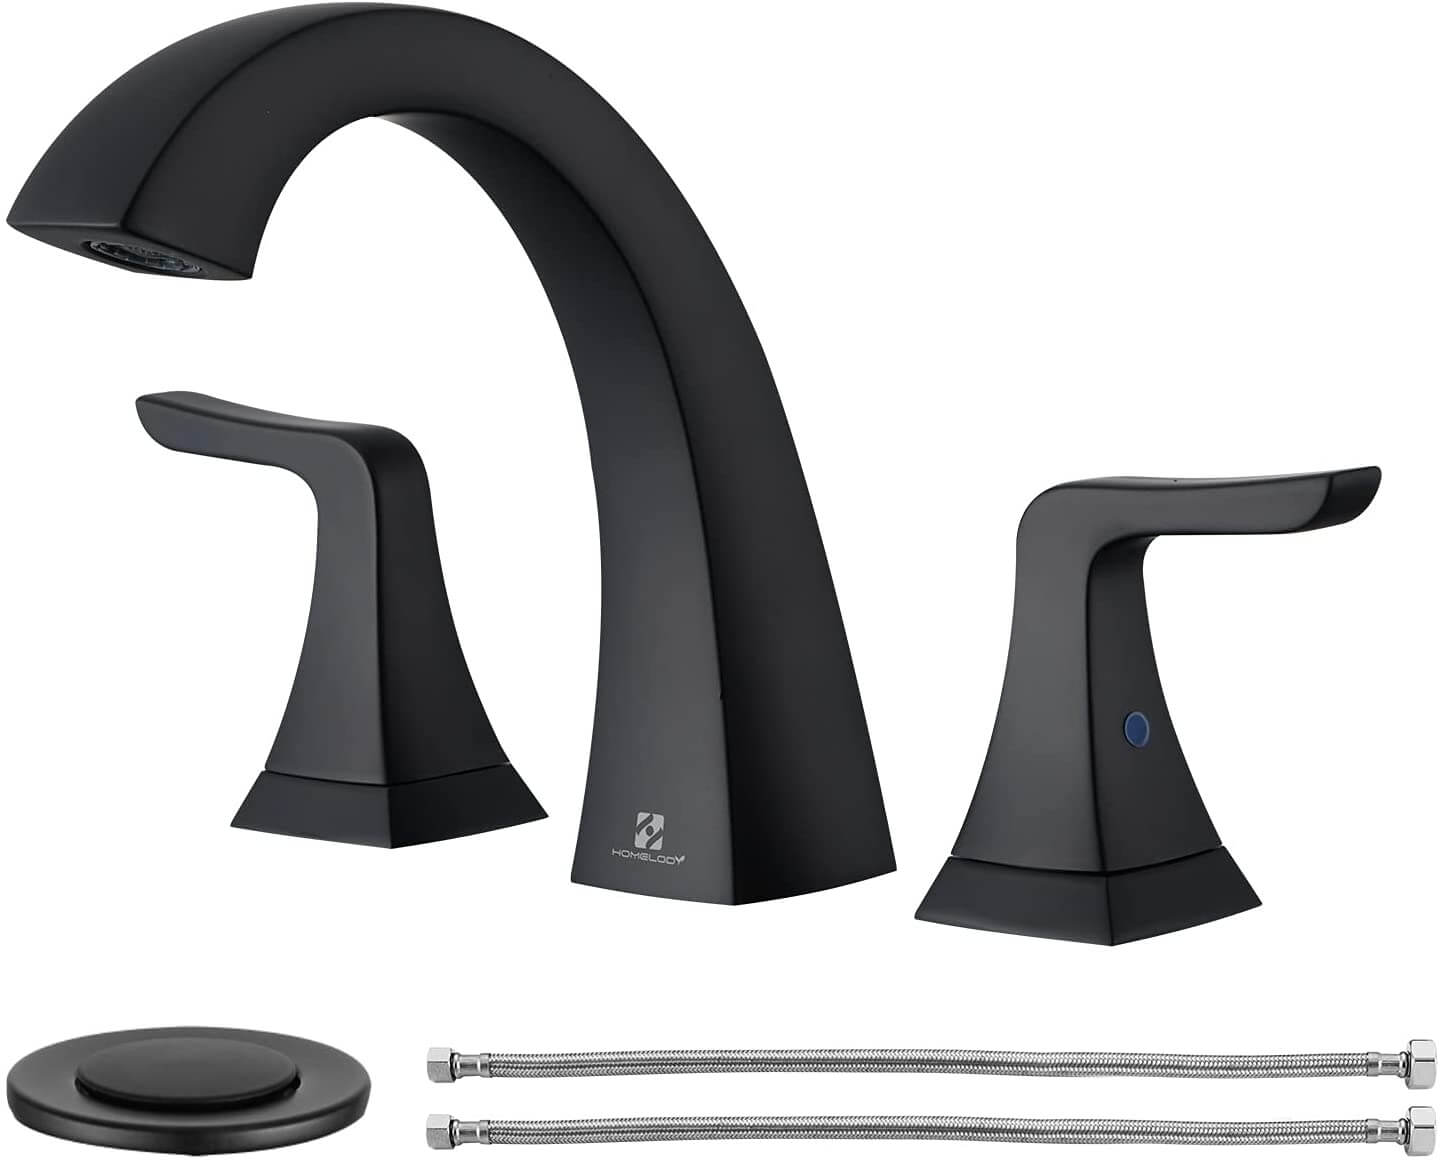 HOMELODY Matte Black Bathroom Faucet for 3 Hole - Homelody